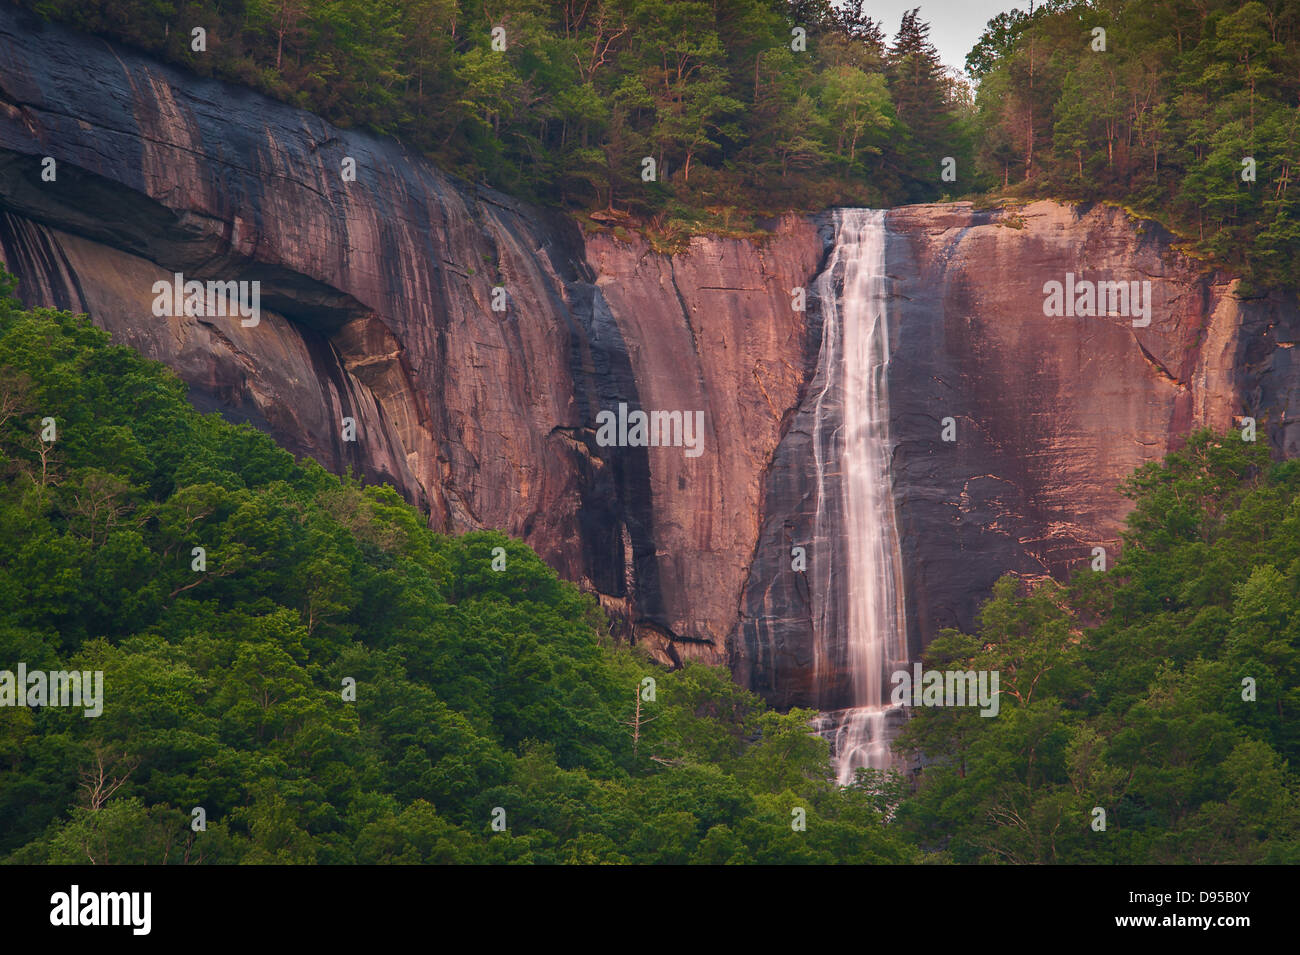 Hickory Nut Falls in Chimney Rock Park North Carolina USA. Color image shows the massive rock formation that makes up the park. Stock Photo